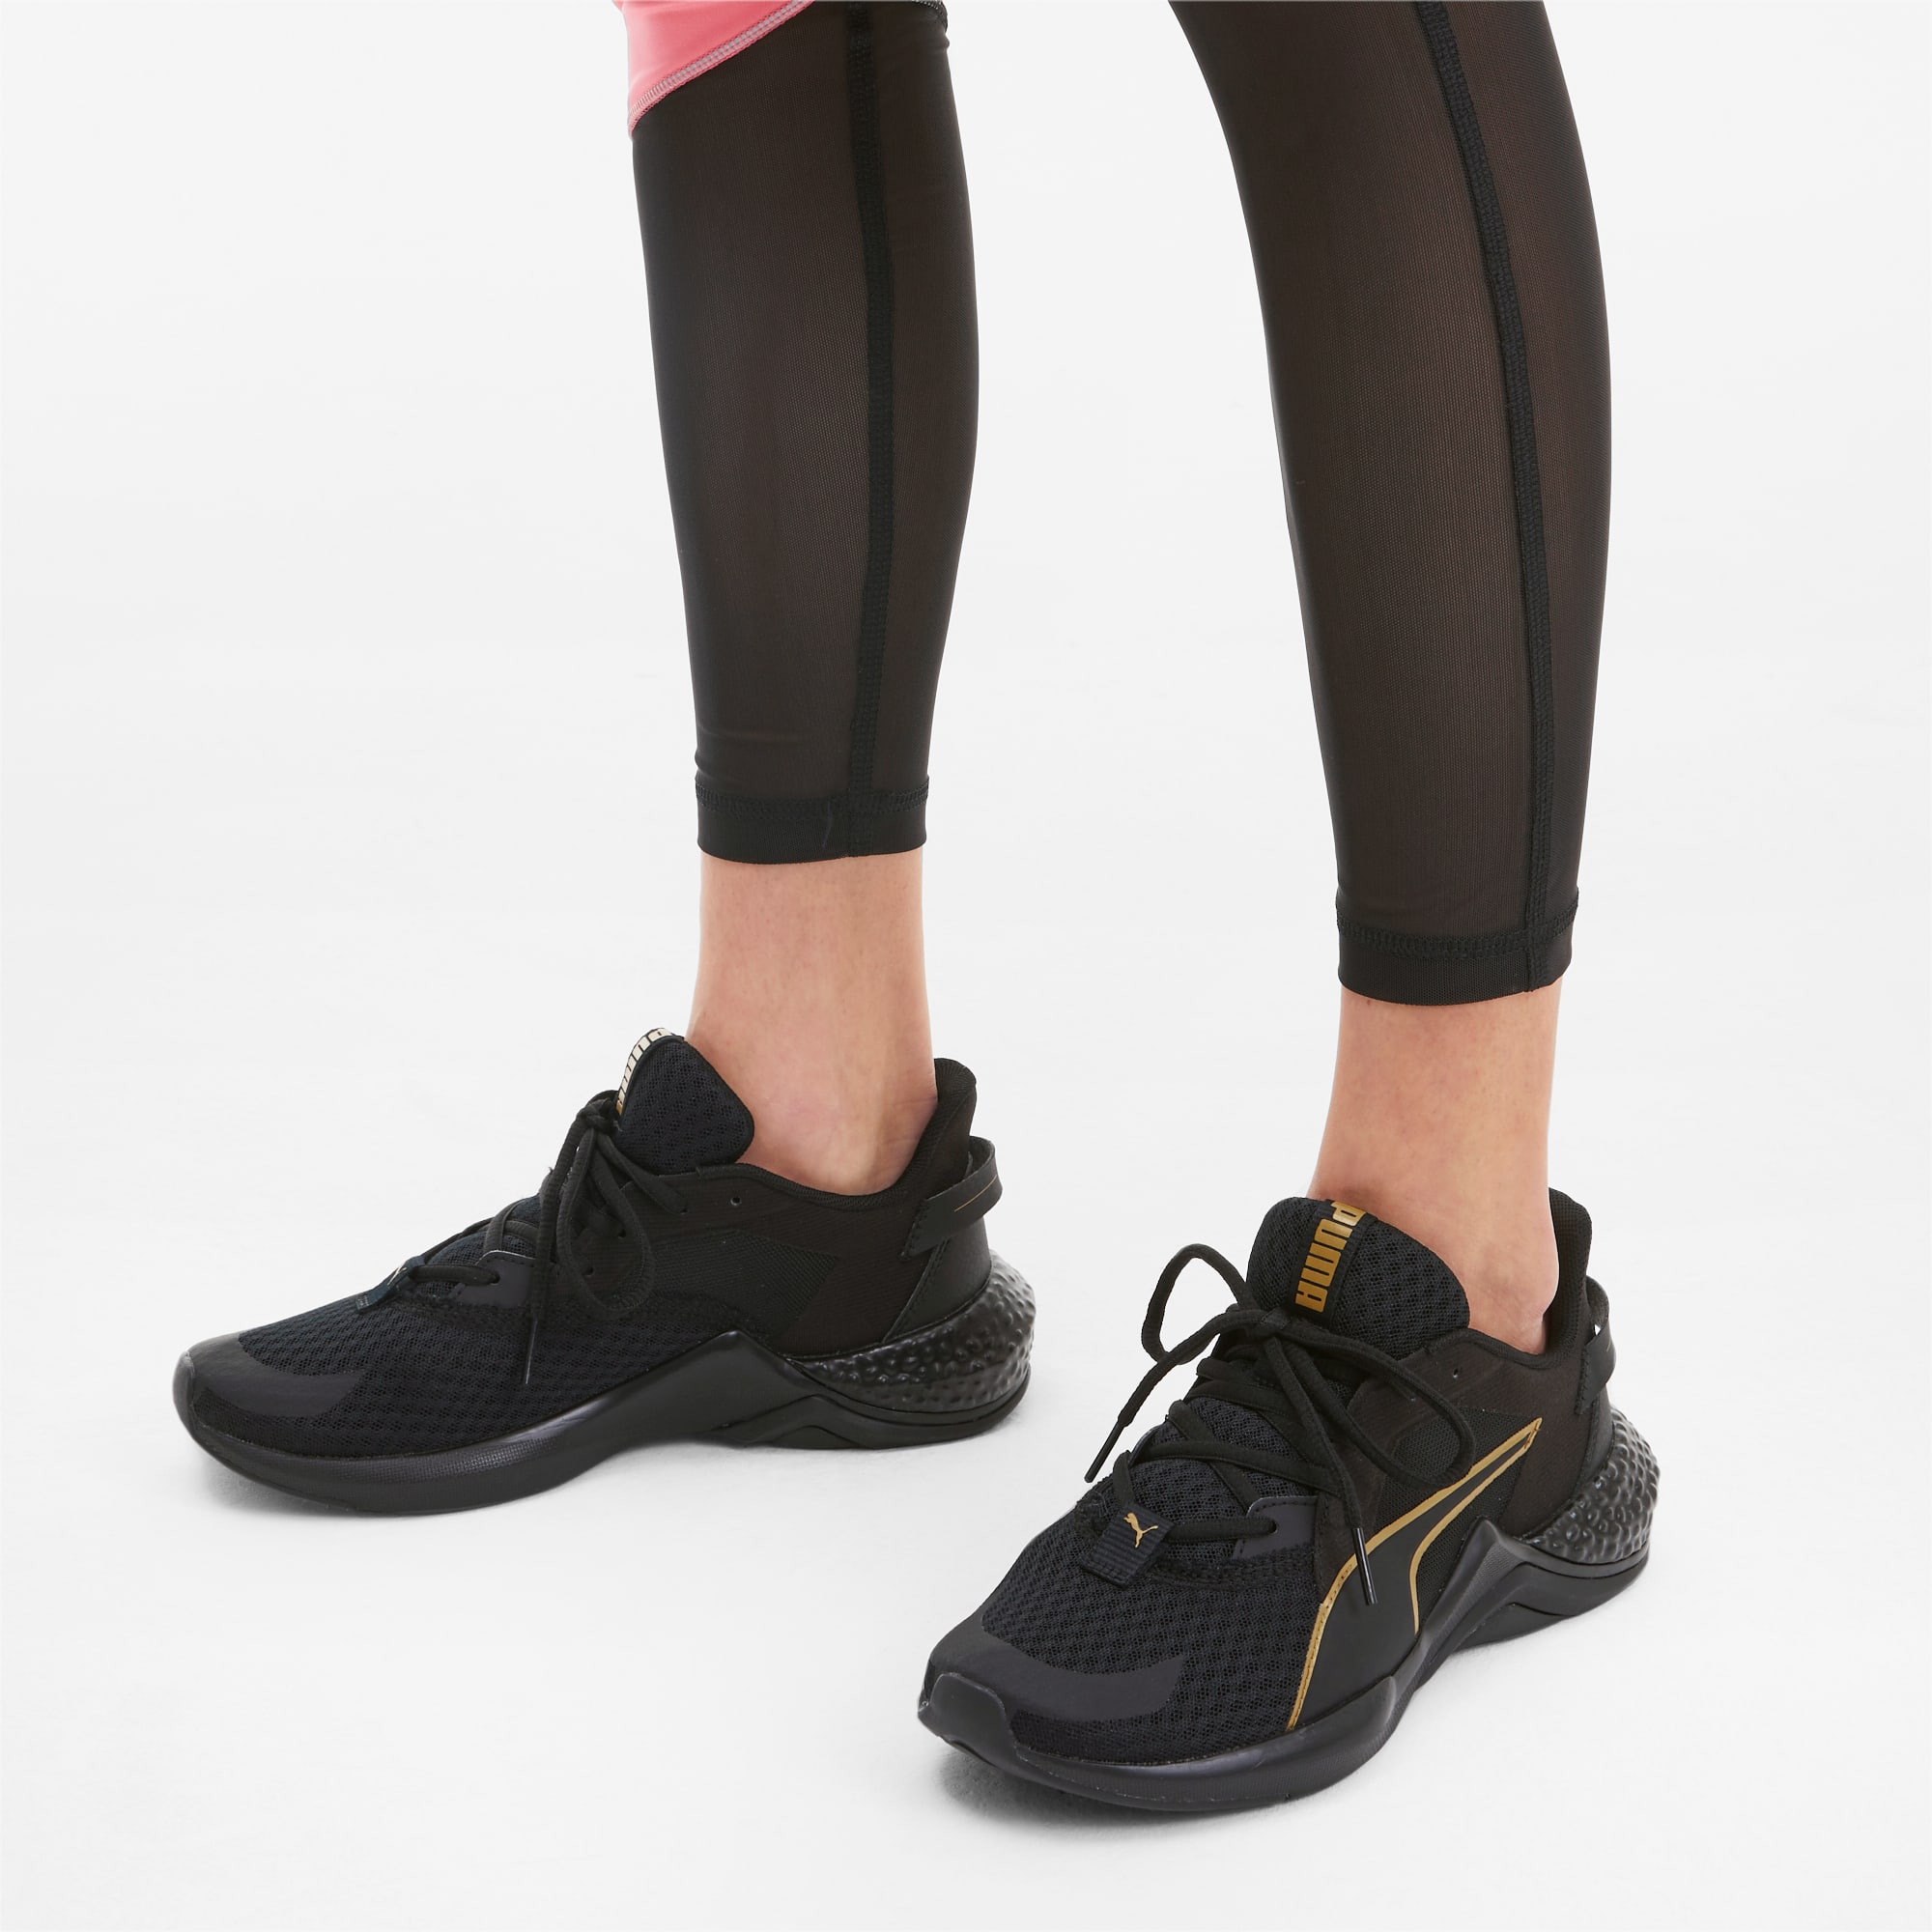 puma black and gold running shoes